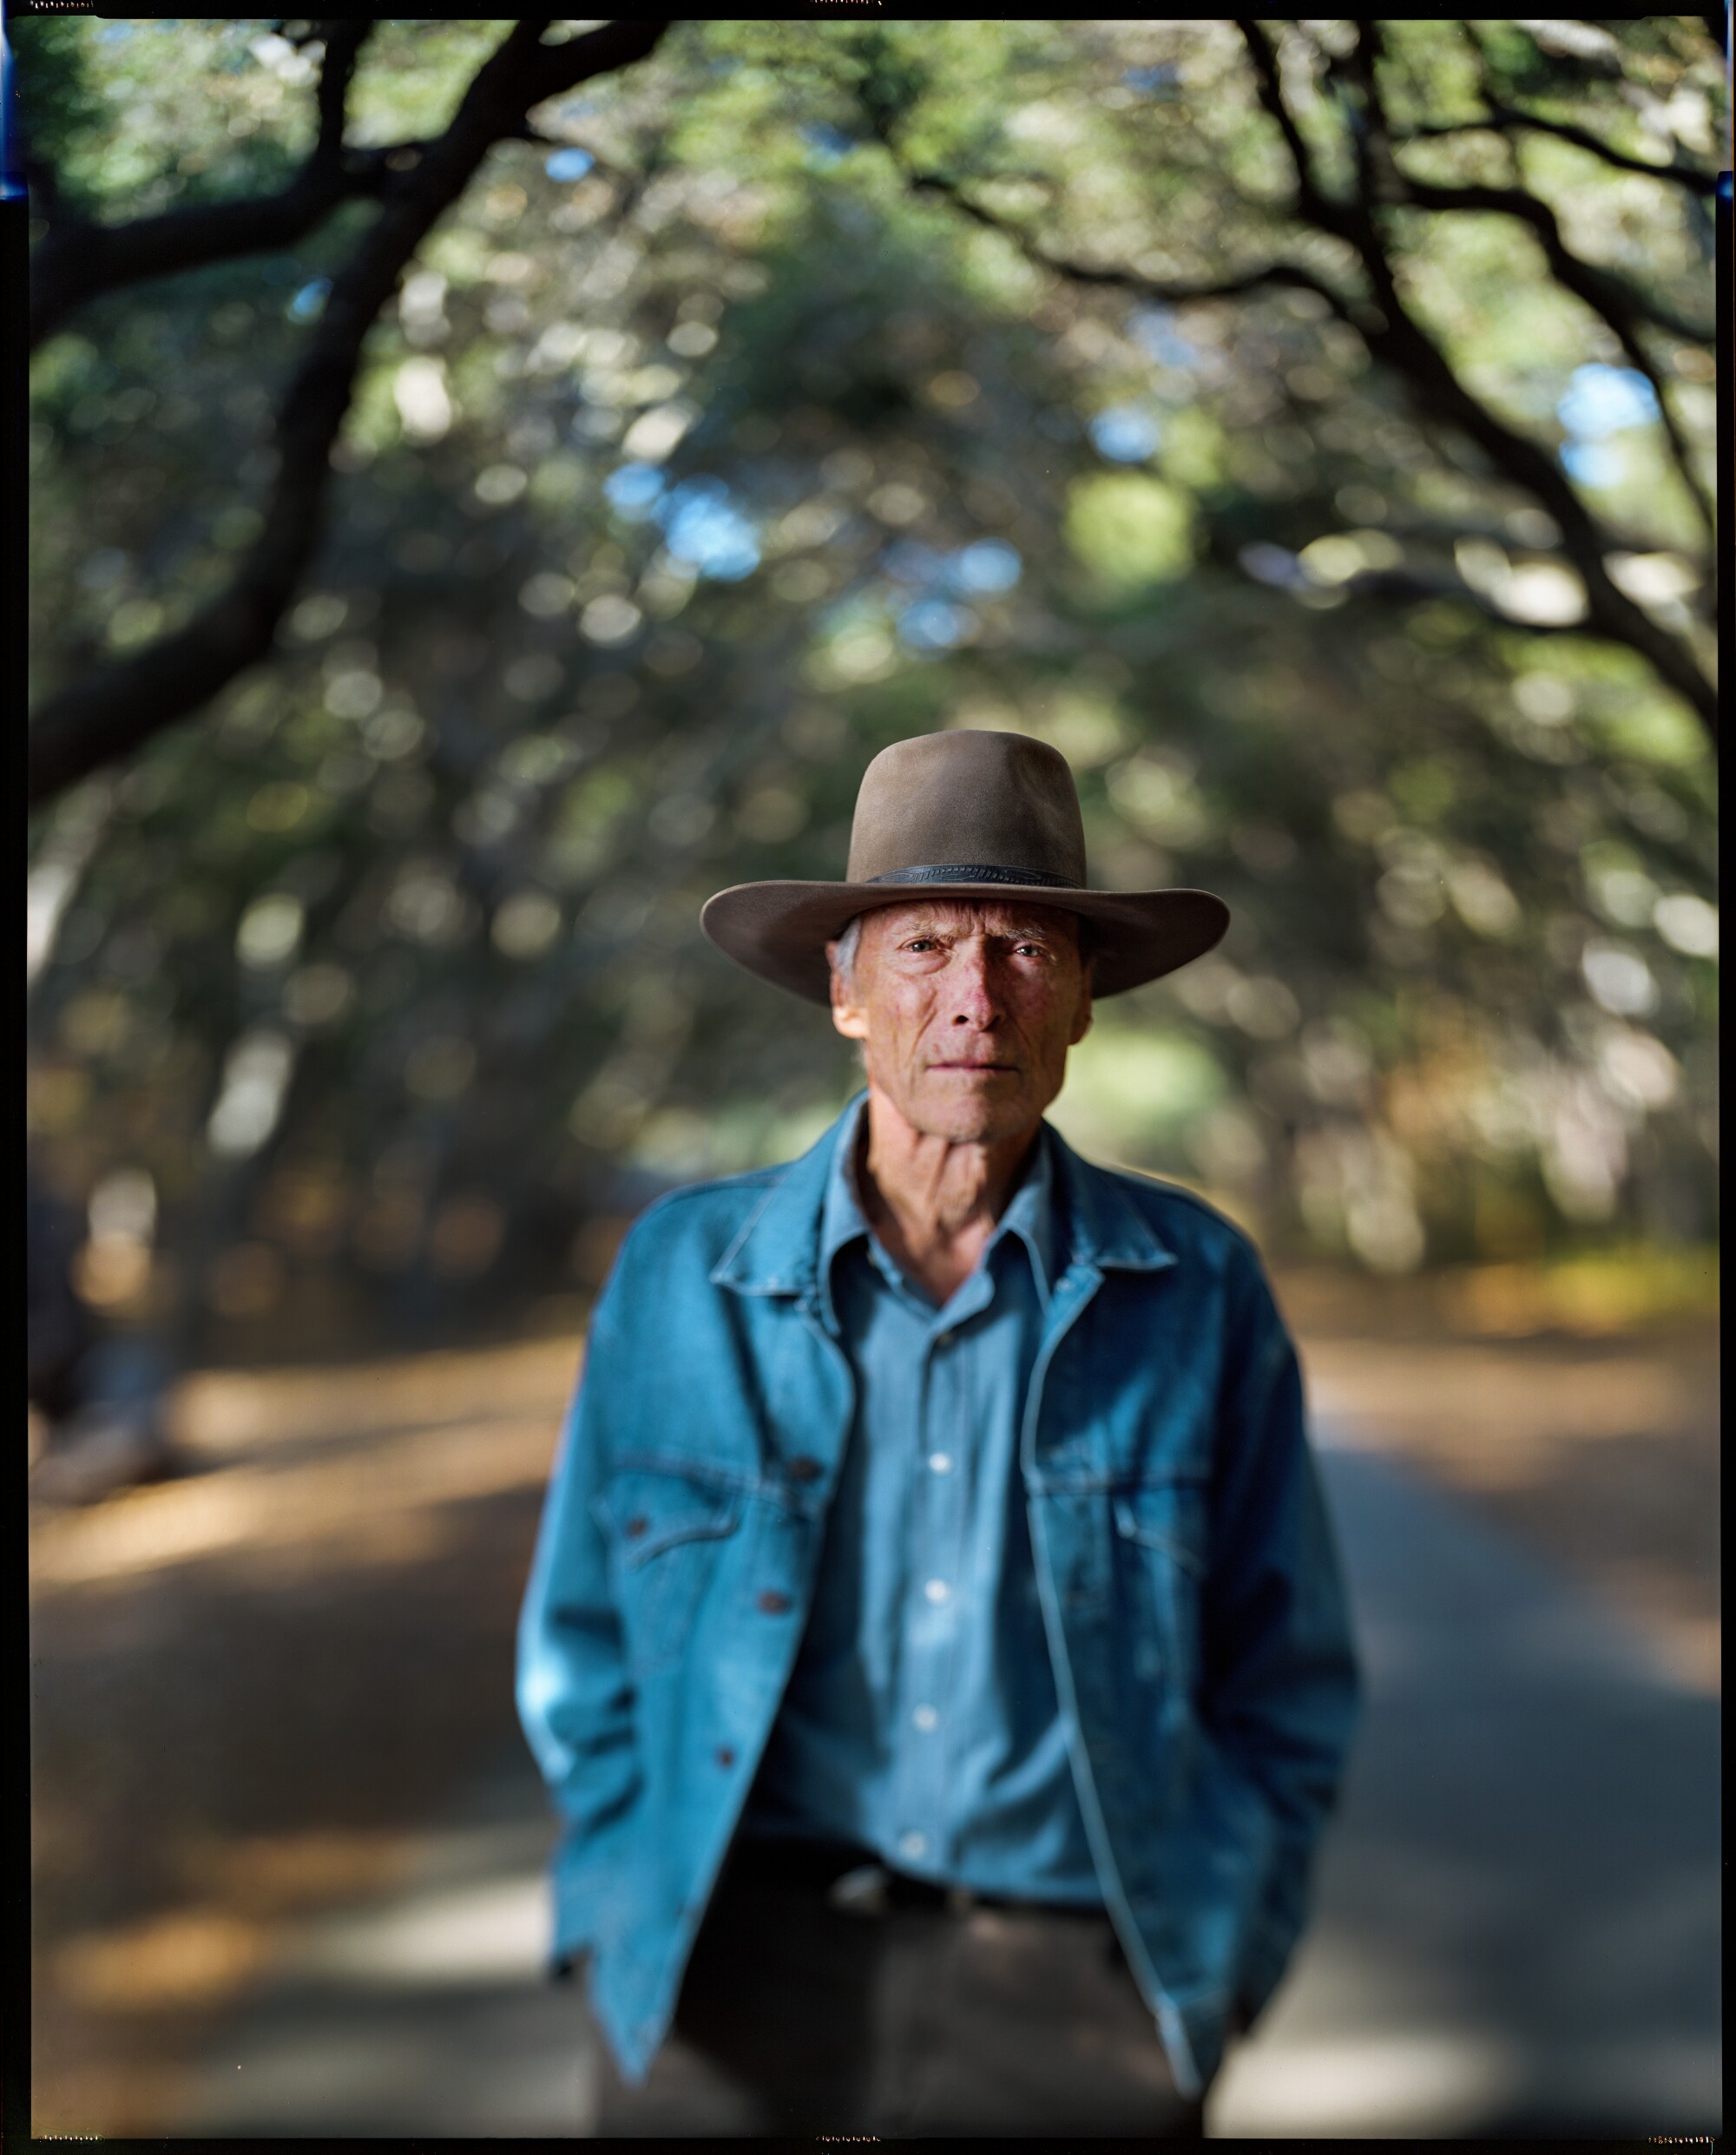 A man in a denim jacket and brimmed hat stands under oak trees for a portrait.